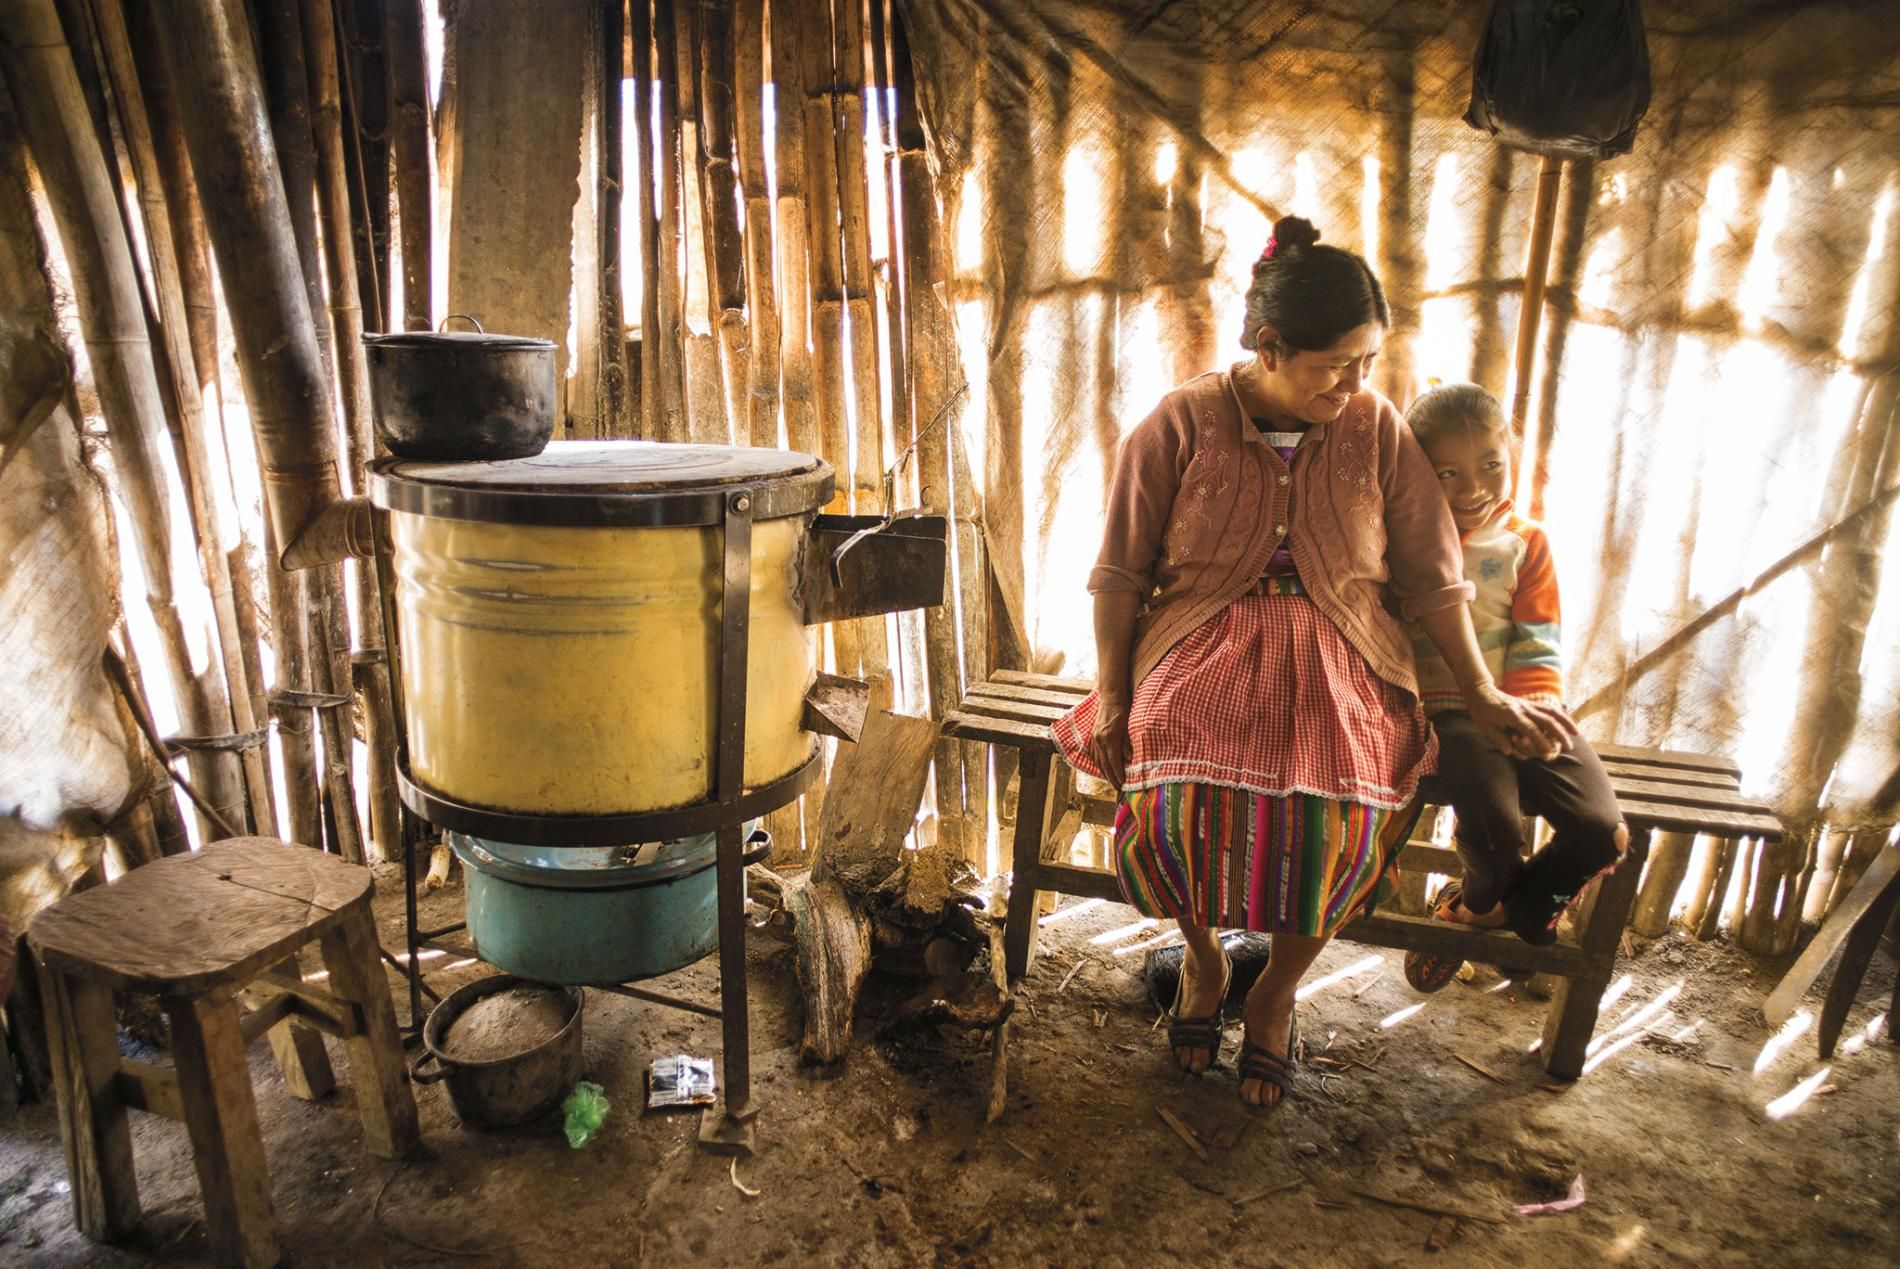 In Jocotenango, Guatemala, Rosa de Sapeta's family used to avoid her smoke-filled kitchen. But since an aid group helped her replace the open fire with a cleaner burning stove, she says, "I have company while I cook." Image by Lynn Johnson. Guatemala, 2017.